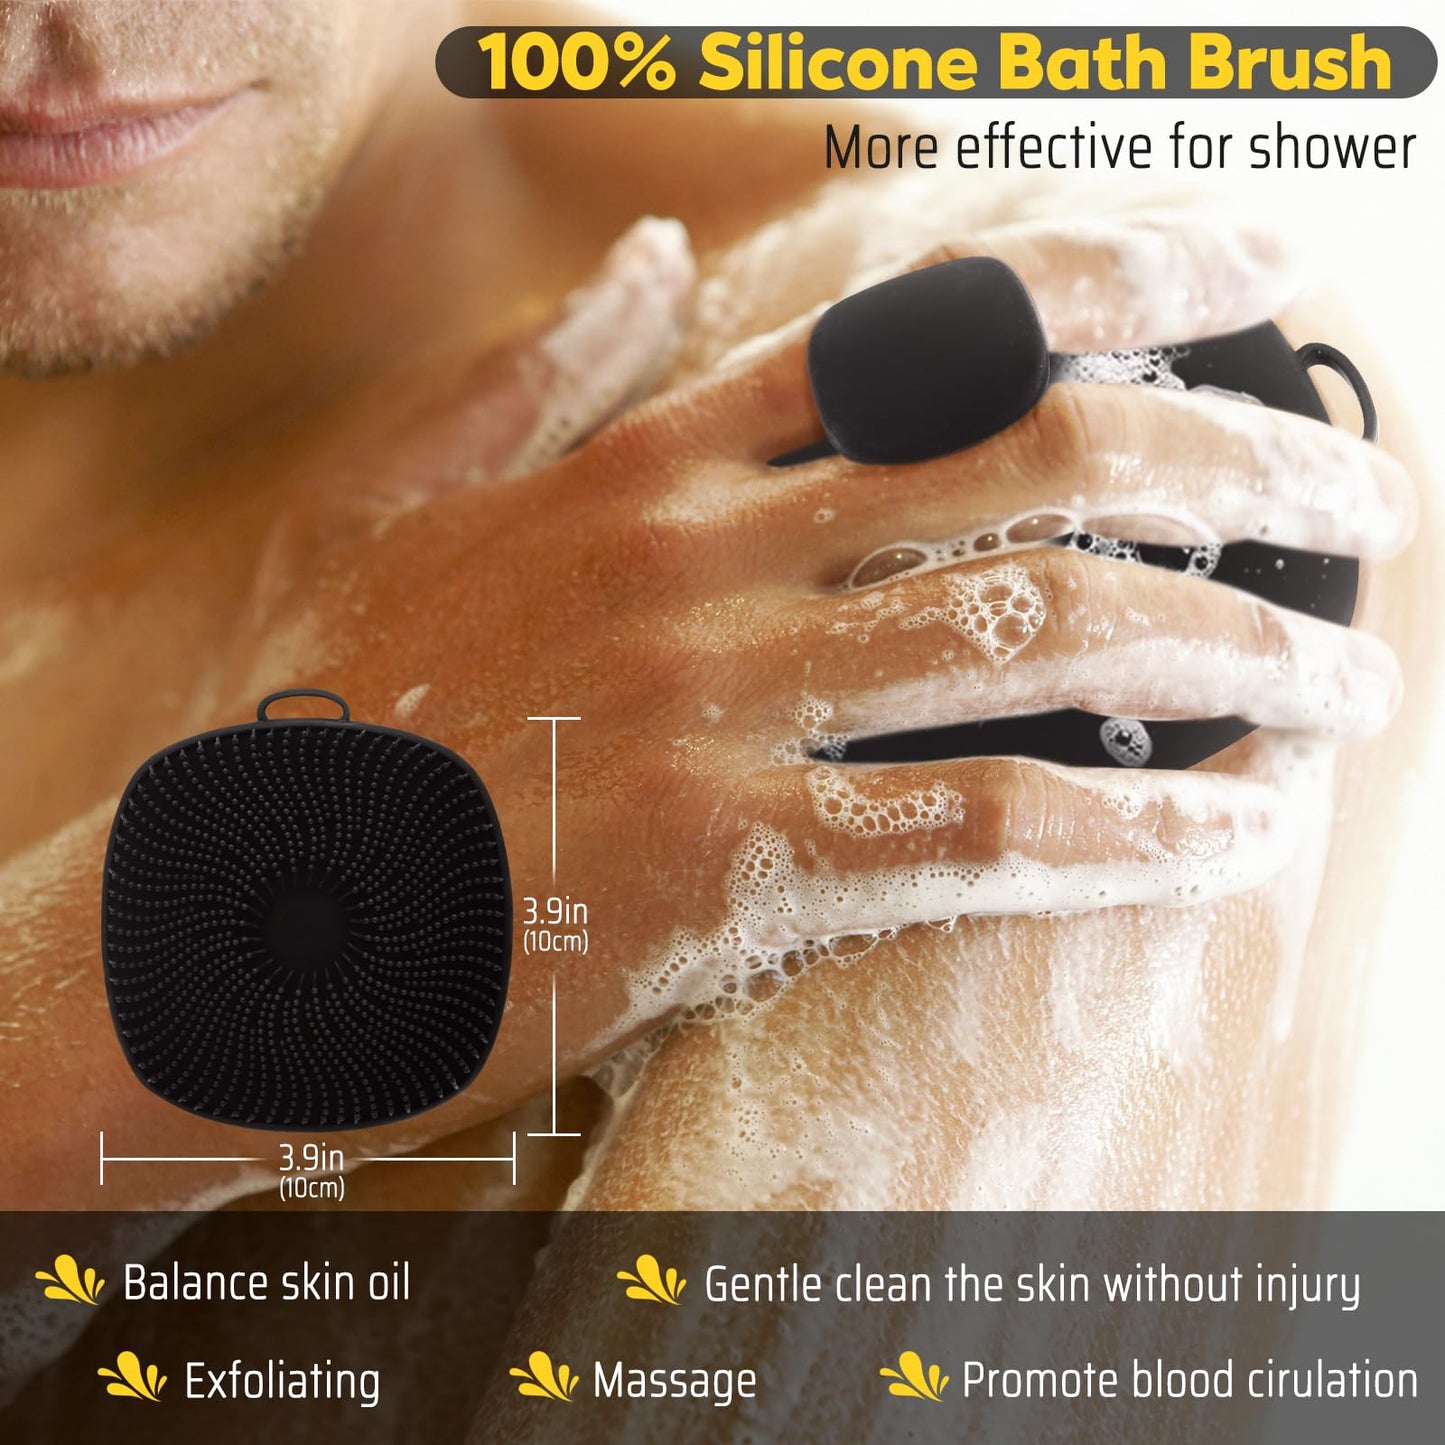 Silicone Body Scrubber For Men, New Upgrade Richer Foam And Effective Cleaning, Premium Silicone Scrubber With Ergonomic No-Slip Handle, Long-Lasting & Easy To Clean, Body Exfoliator Scrubber for Men